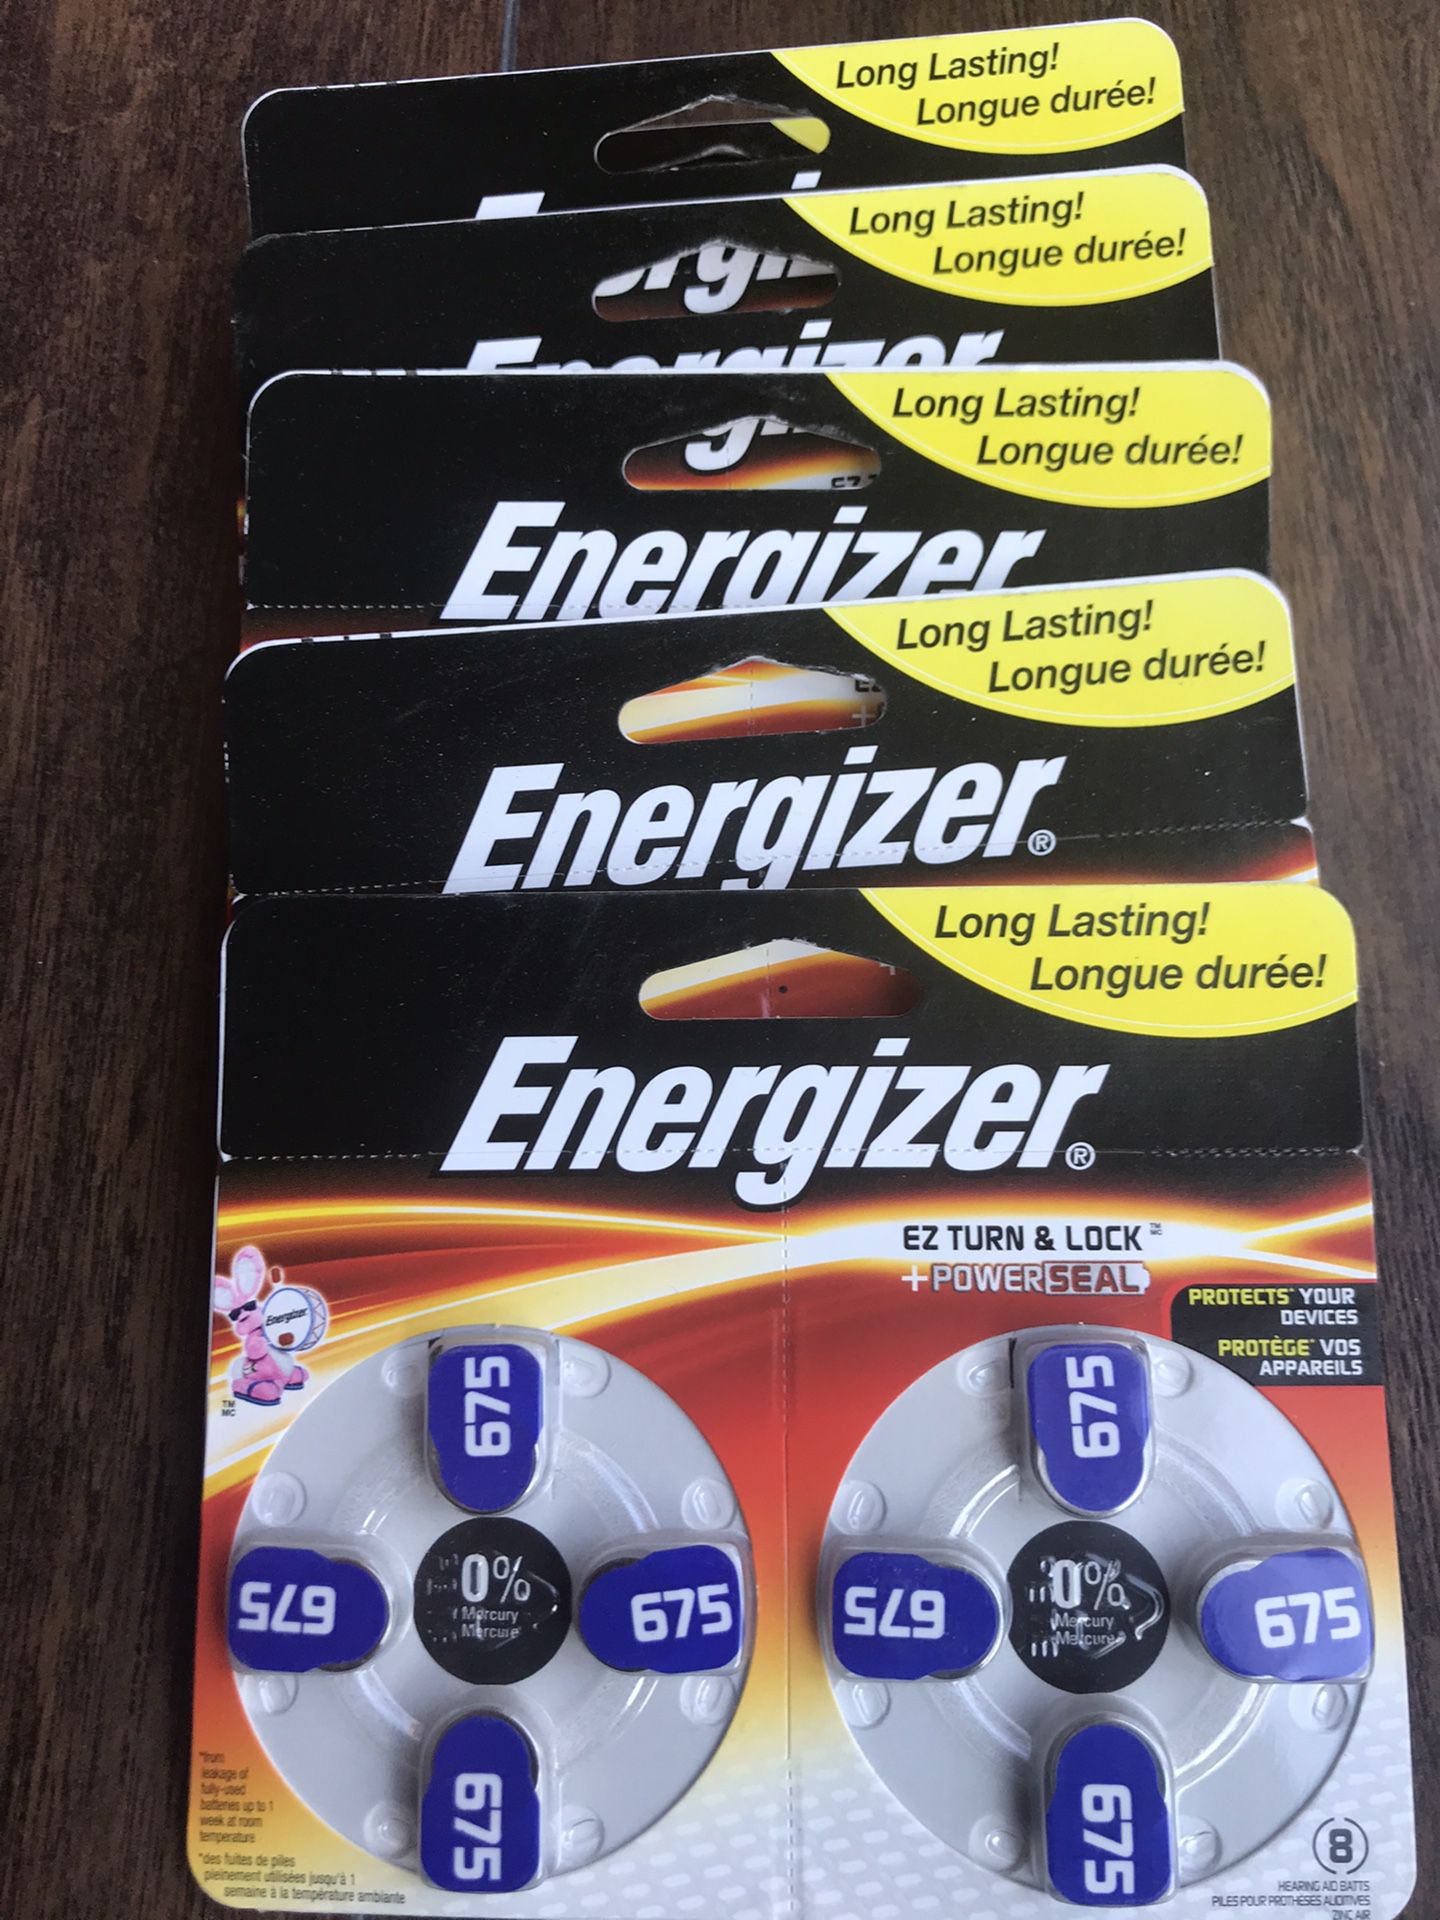 Energizer EZ Turn & Lock Hearing Aid Batteries 675. Lot of 6. Long Lasting Never Used. Brand New. Great Deal.